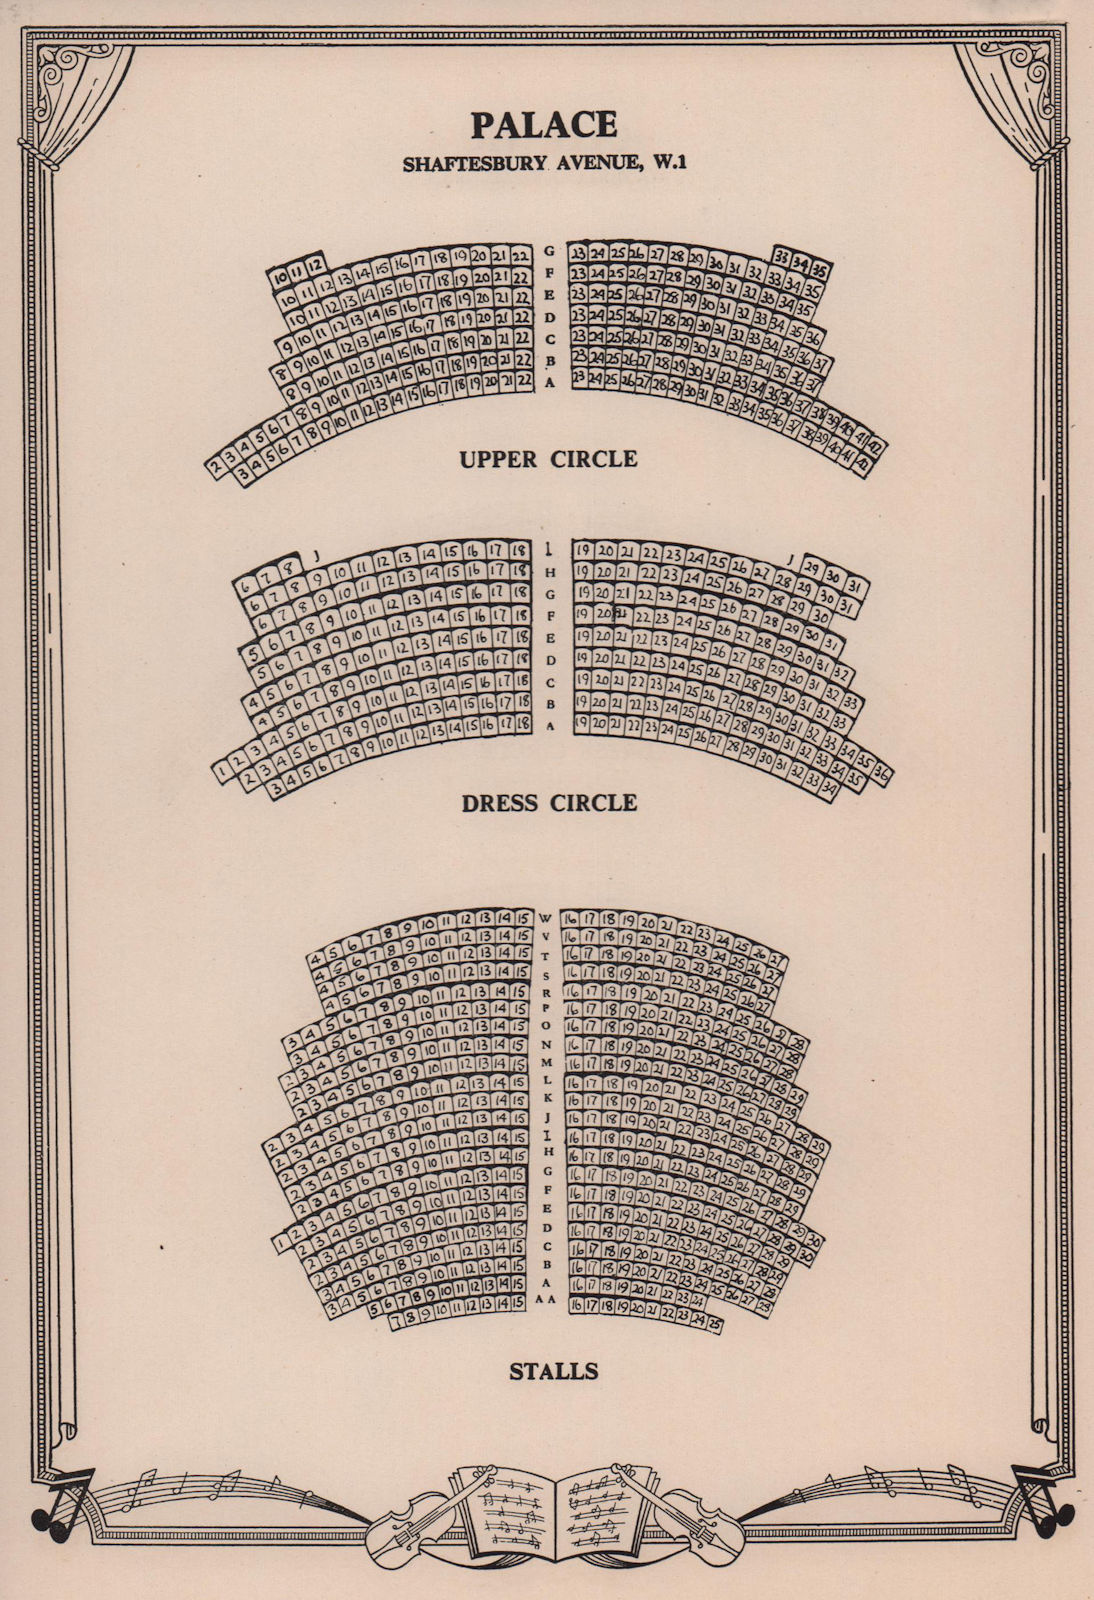 Associate Product Palace Theatre, Shaftesbury Aveue, London. Vintage seating plan 1955 old print